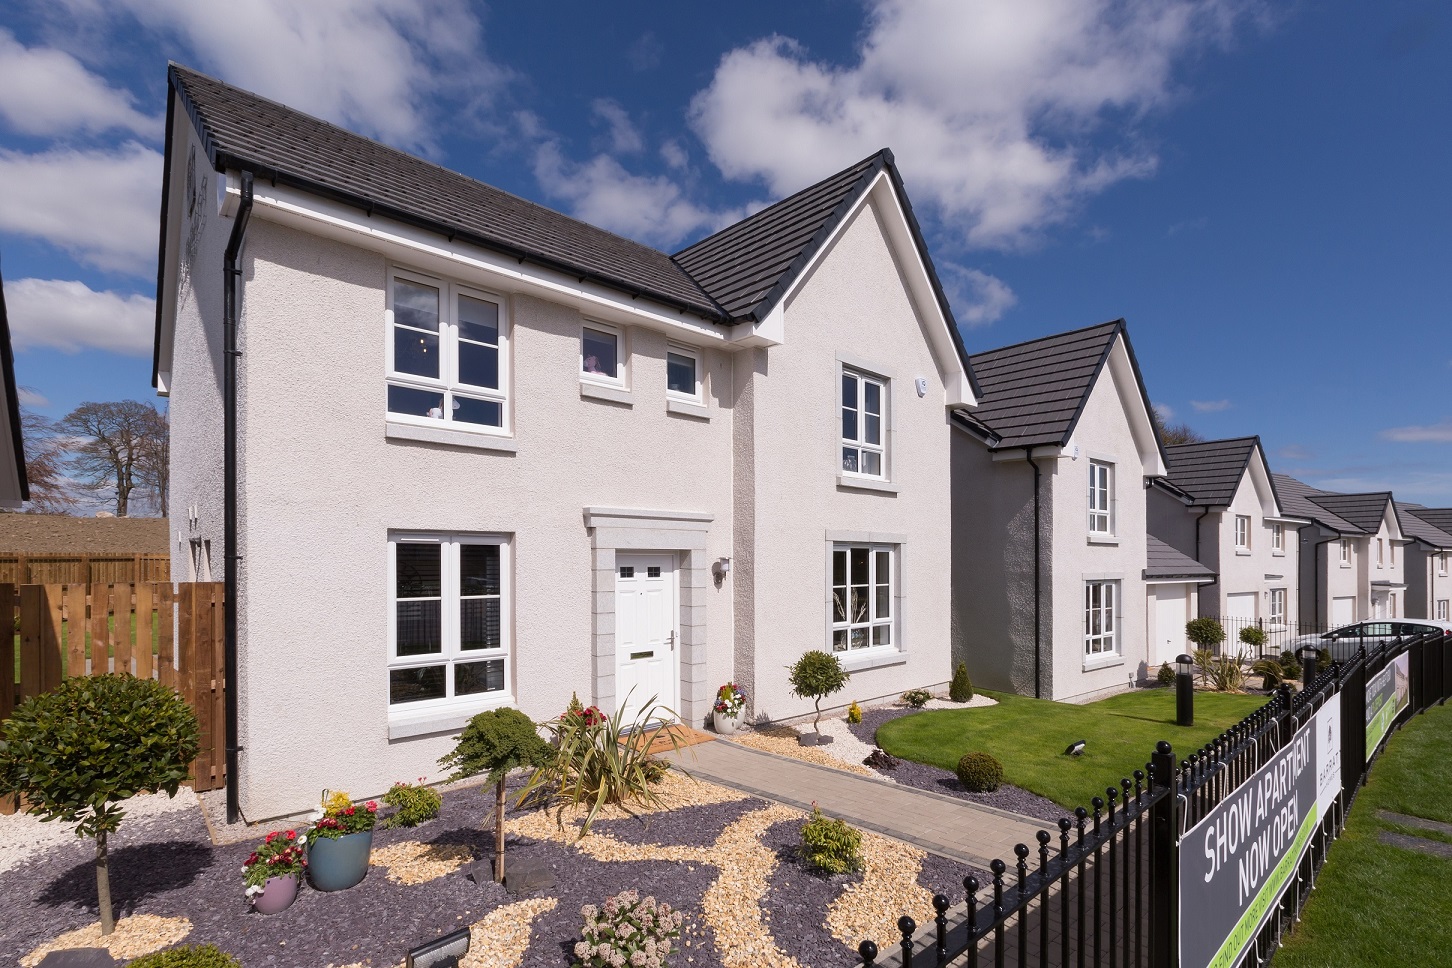 Barratt to deliver 3,400 new homes across Scotland this year